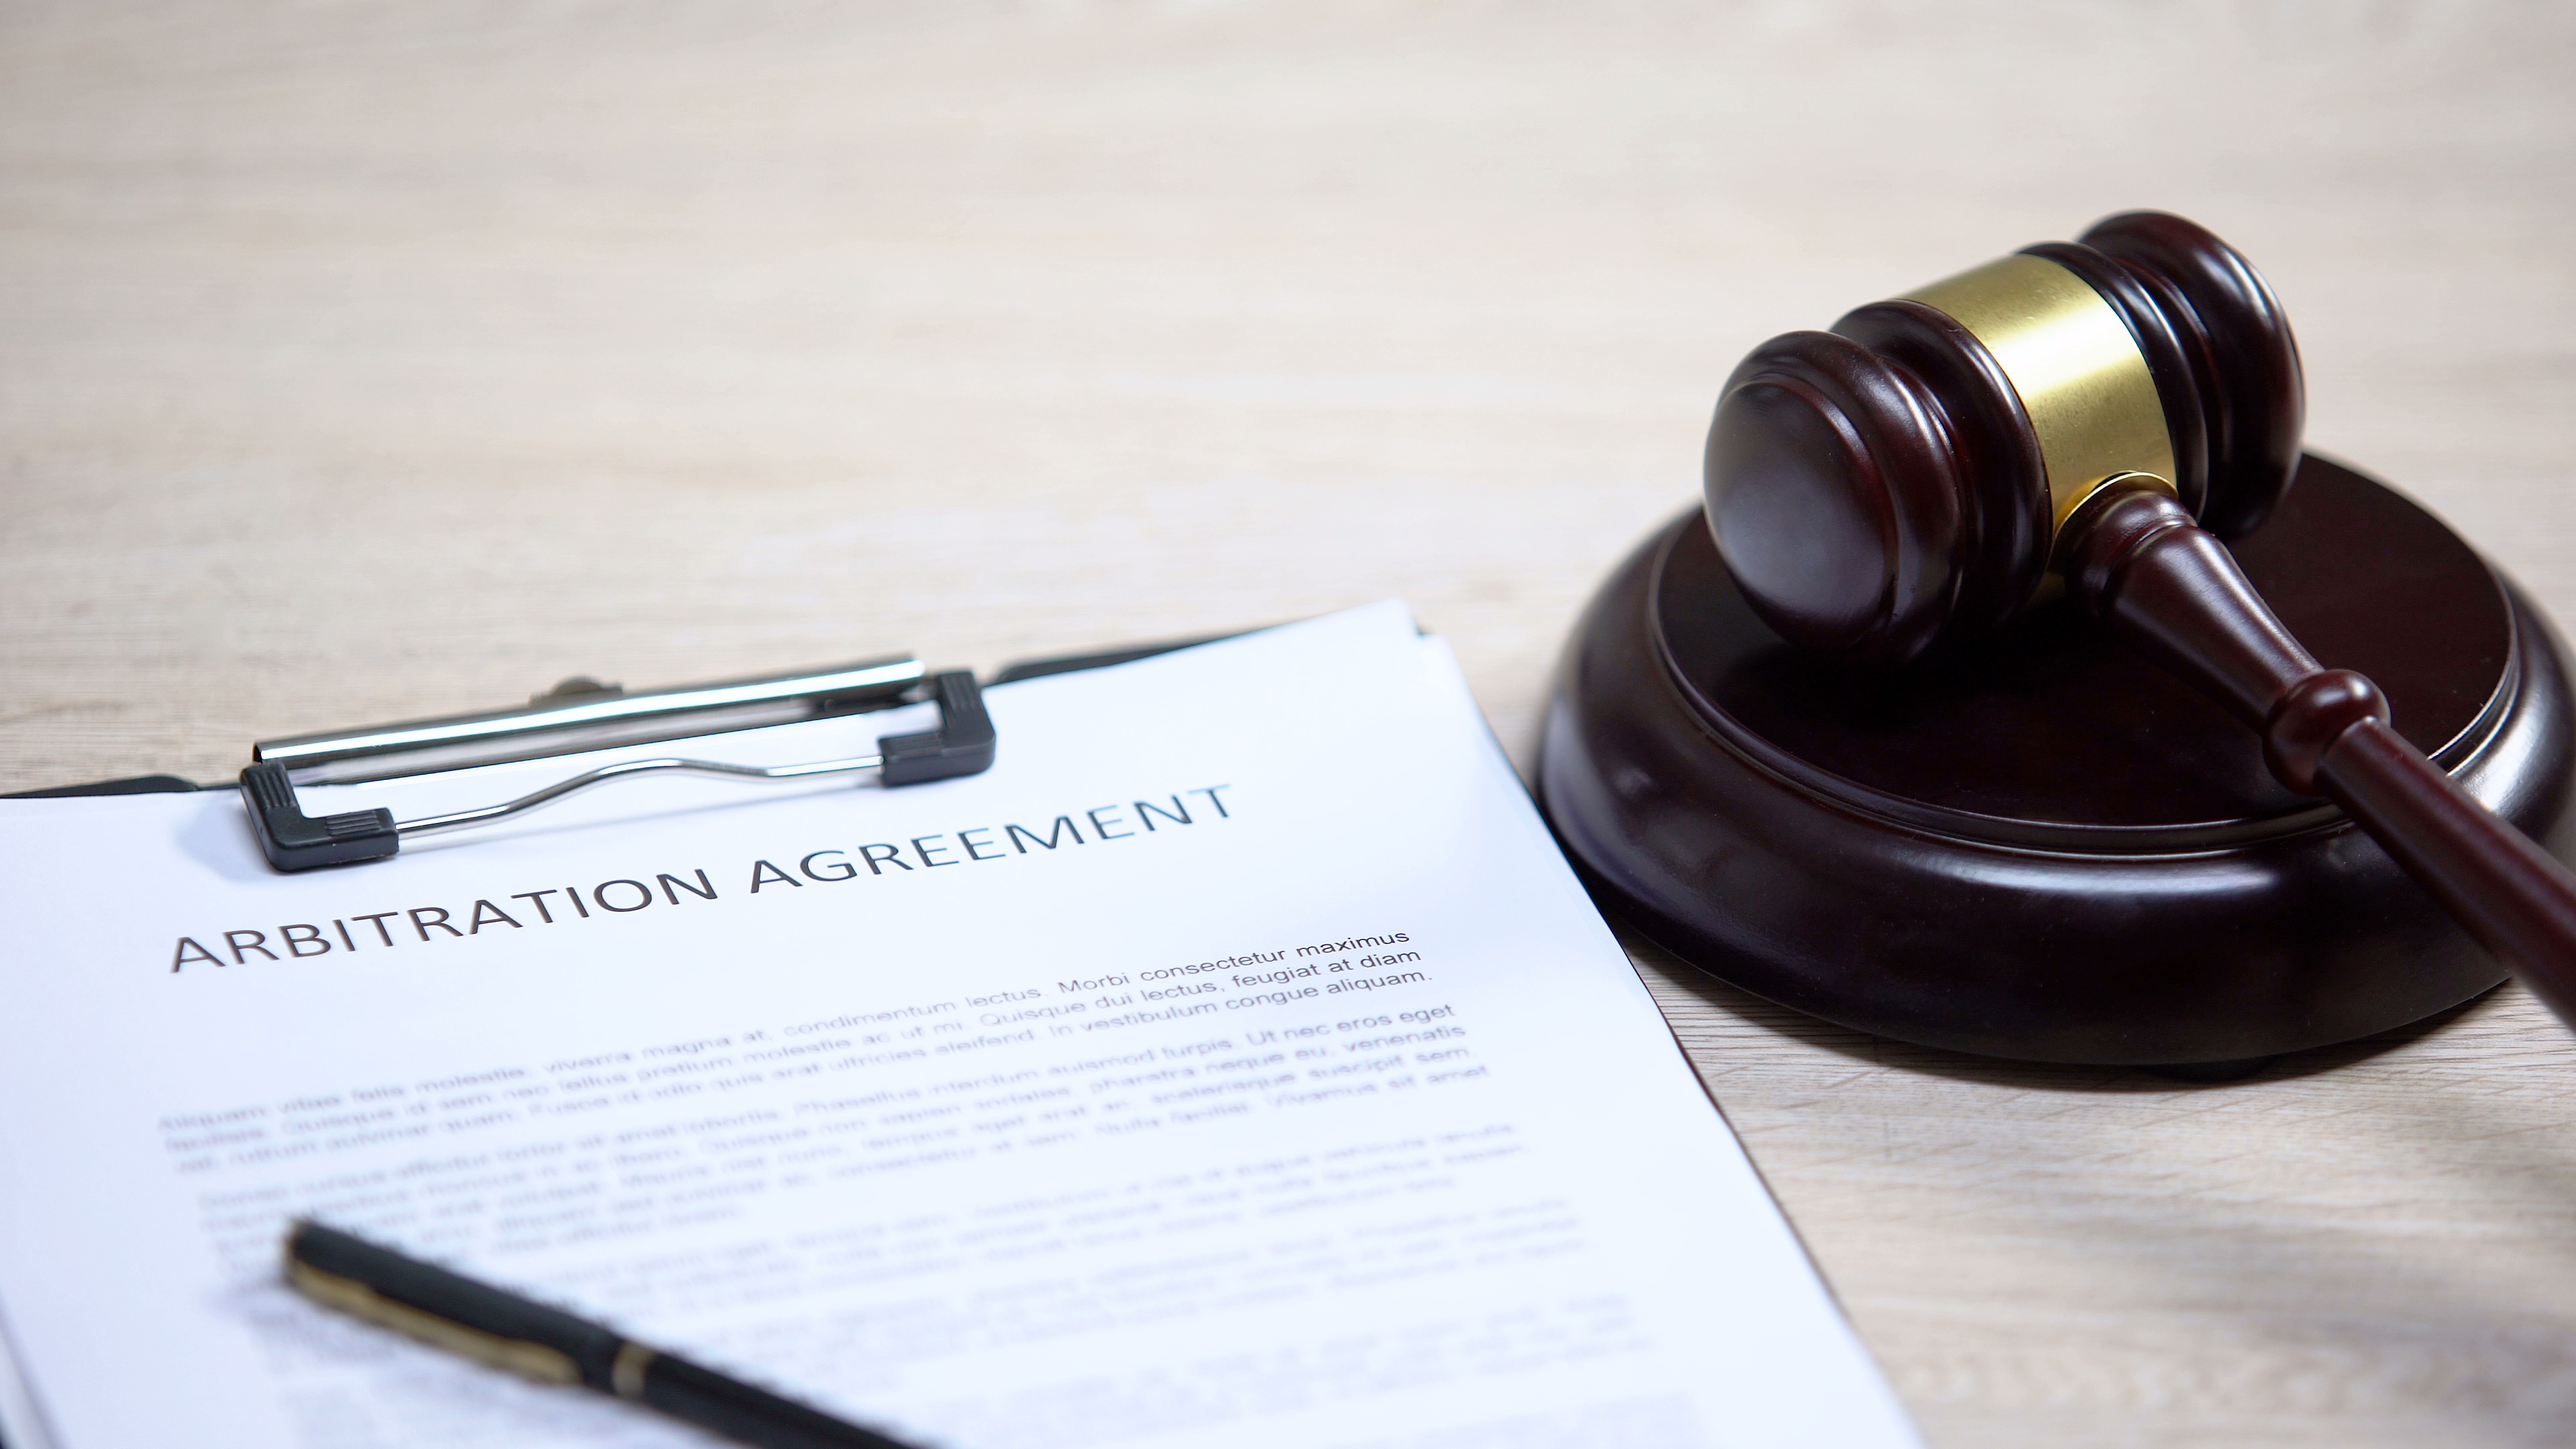 Arbitration Agreement - Arbitration vs Litigation: What’s the Difference?